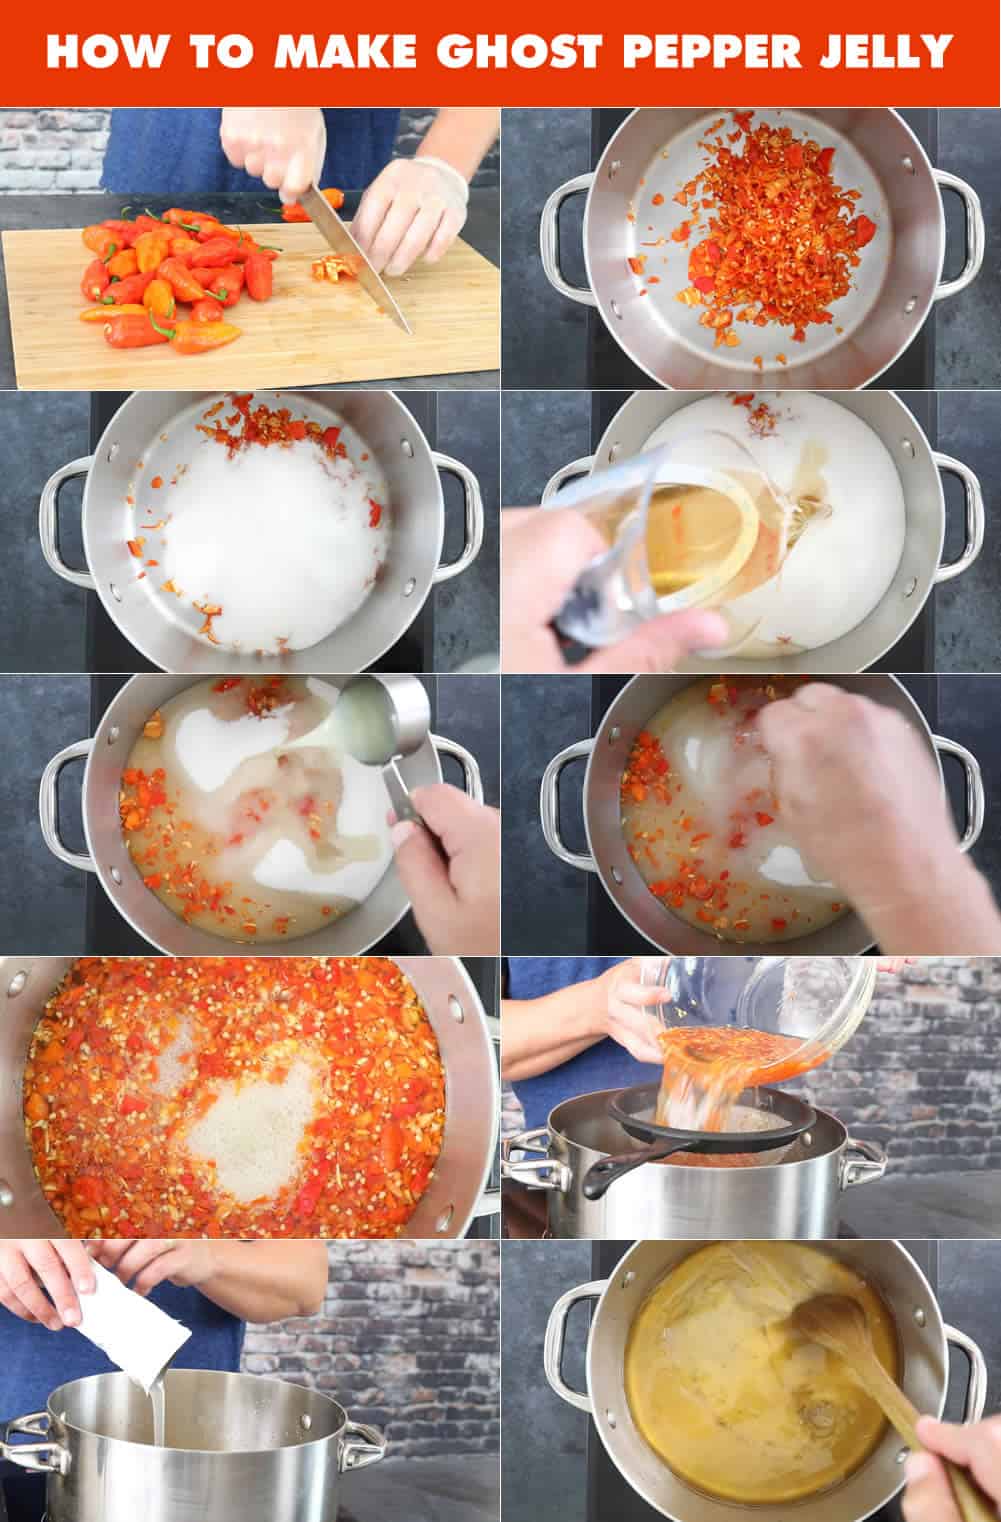 The process of making Ghost Pepper Jelly